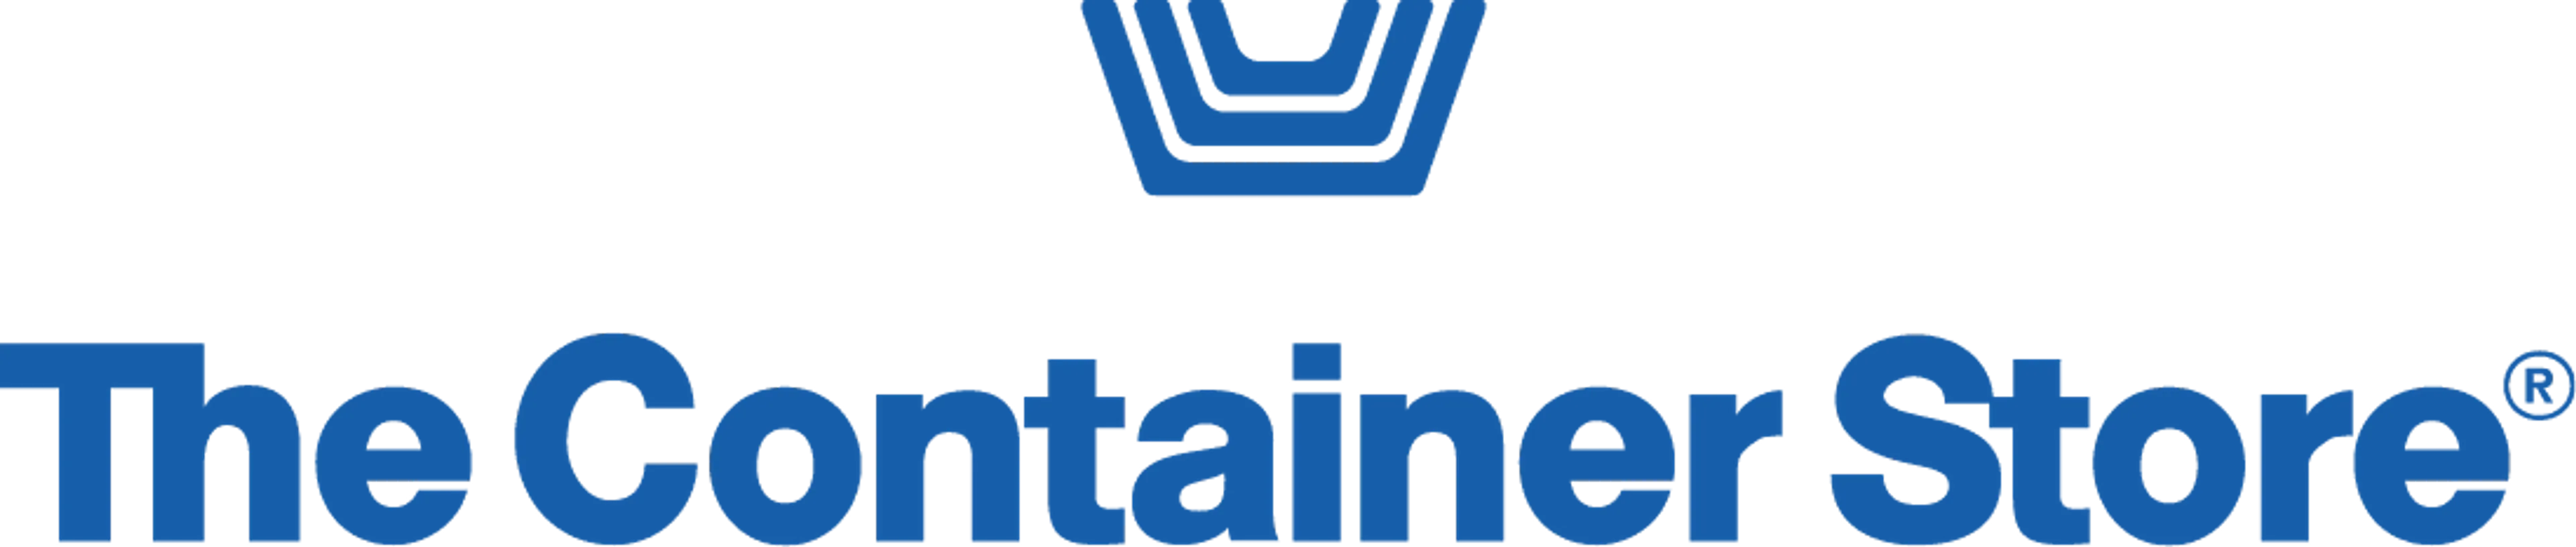 THE CONTAINER STORE logo